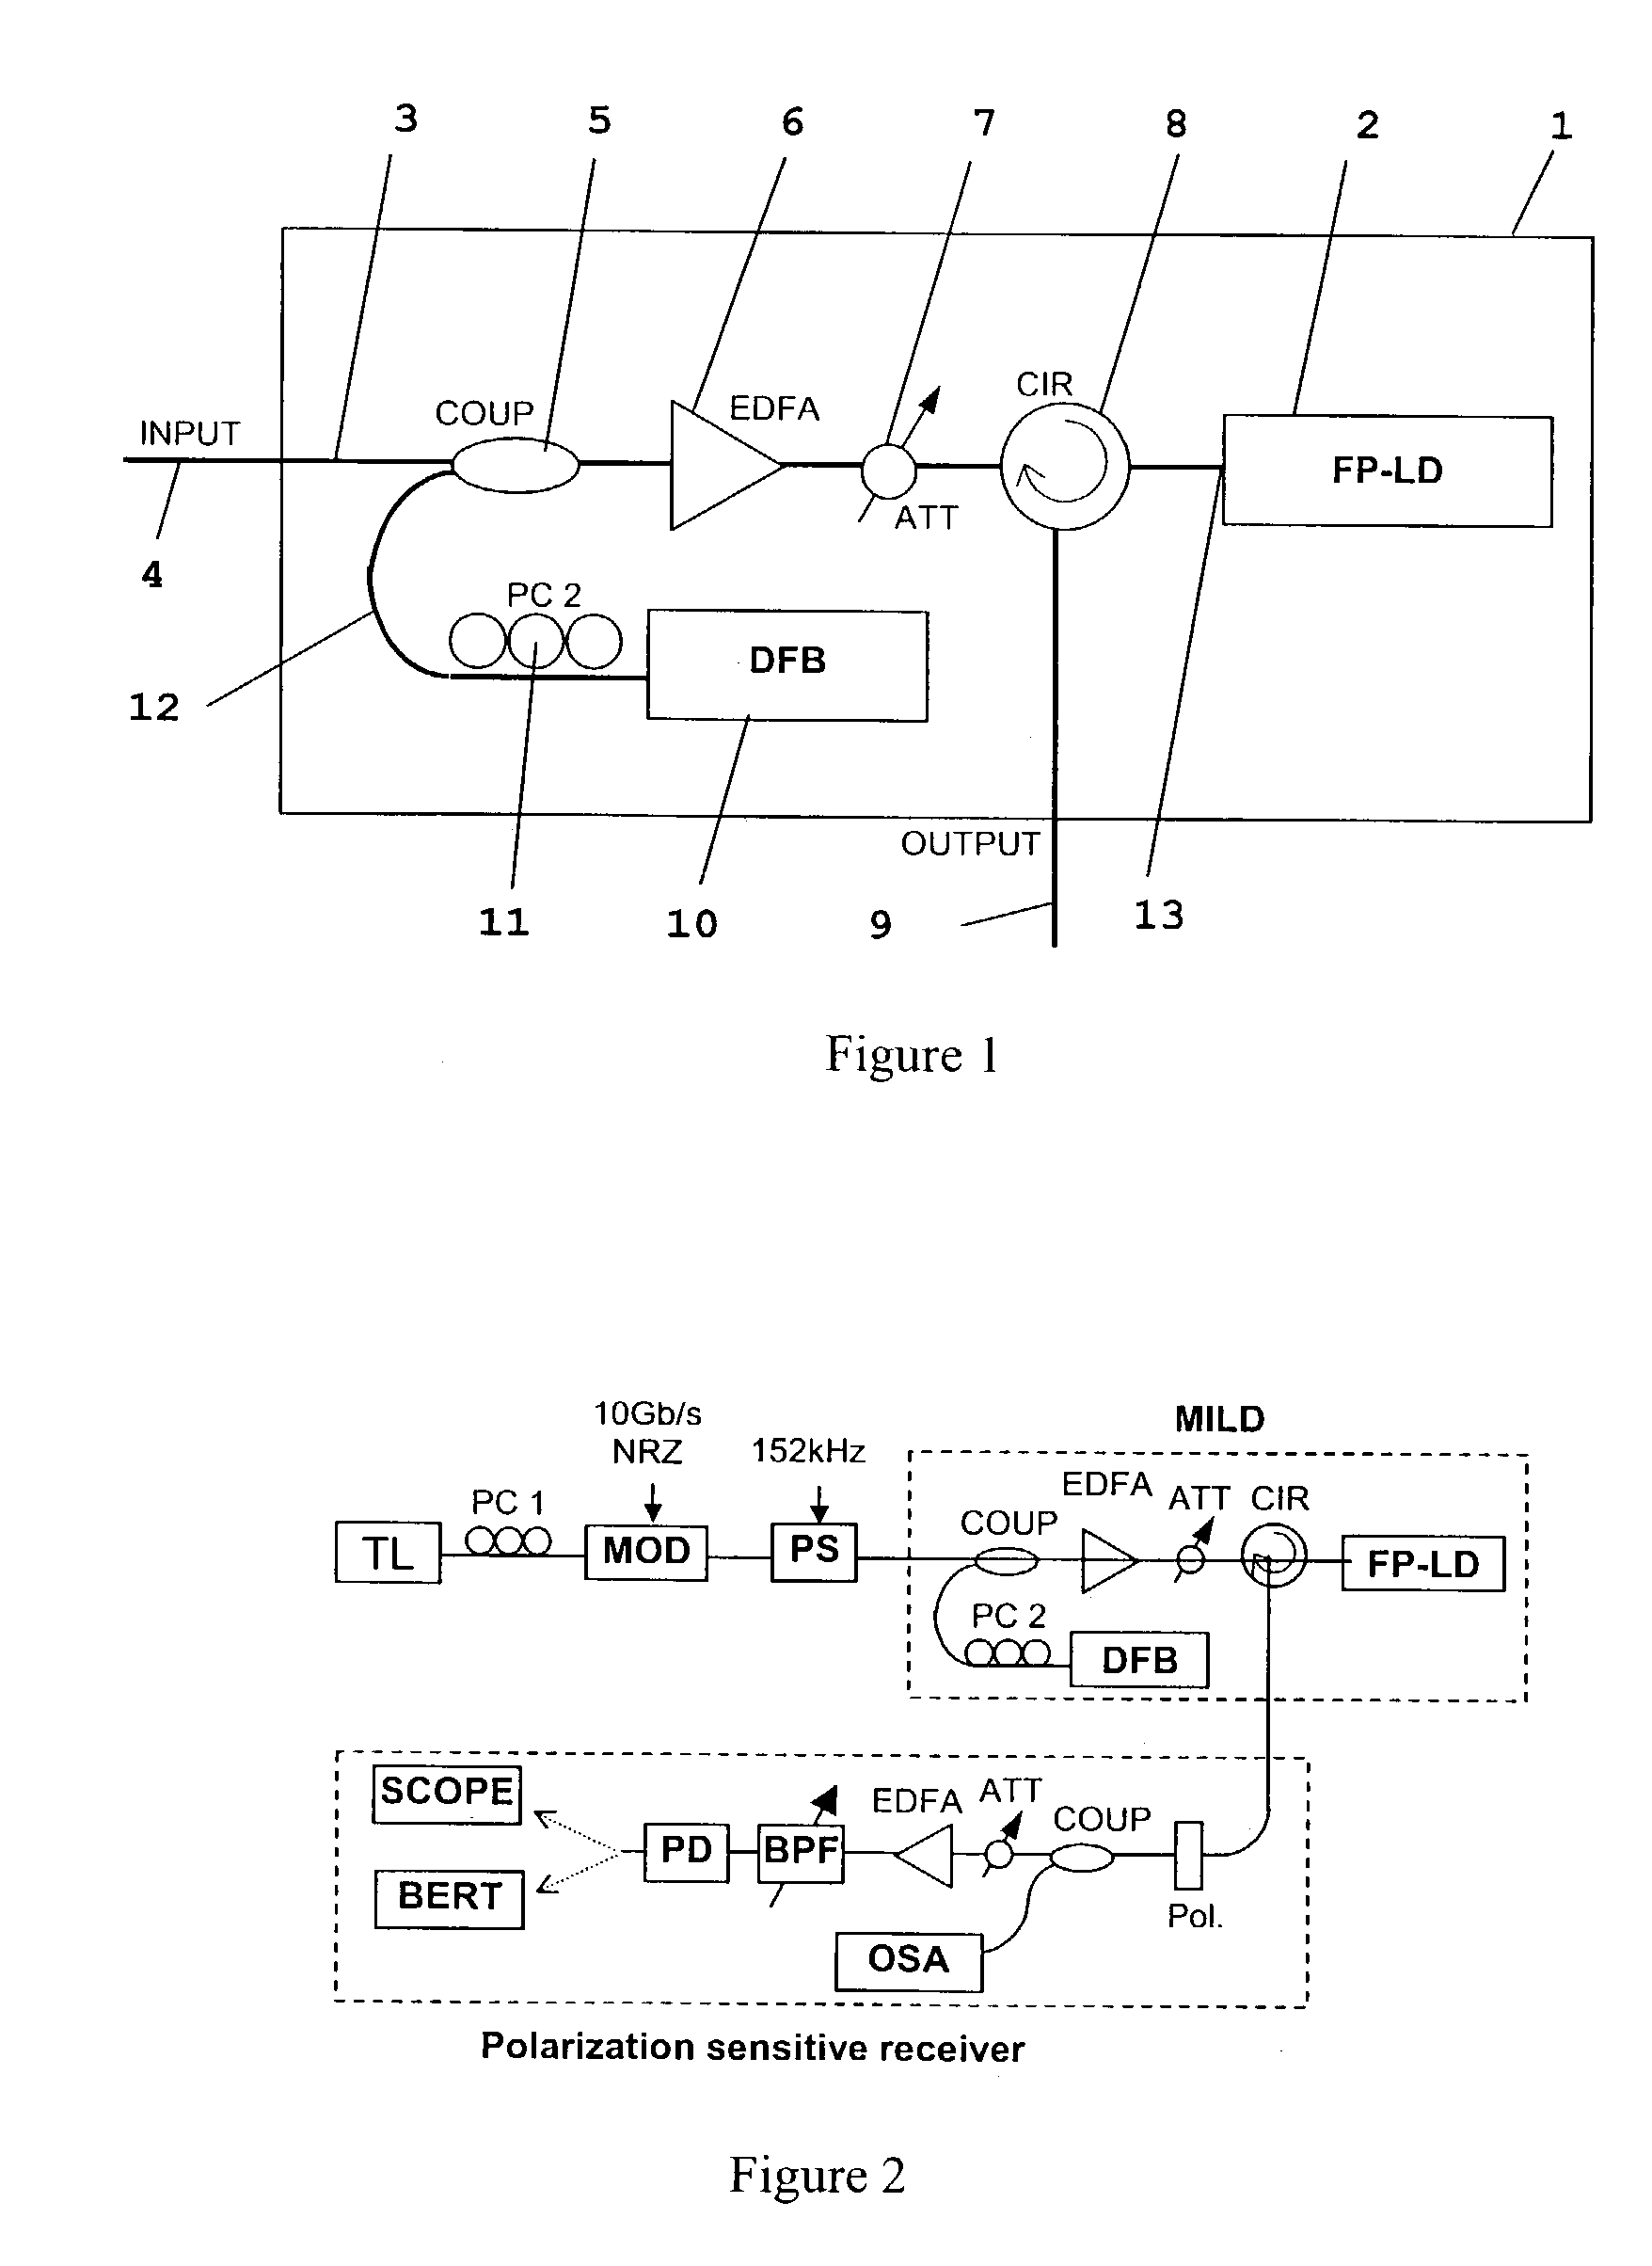 Method and apparatus for controlling the polarization of an optical signal